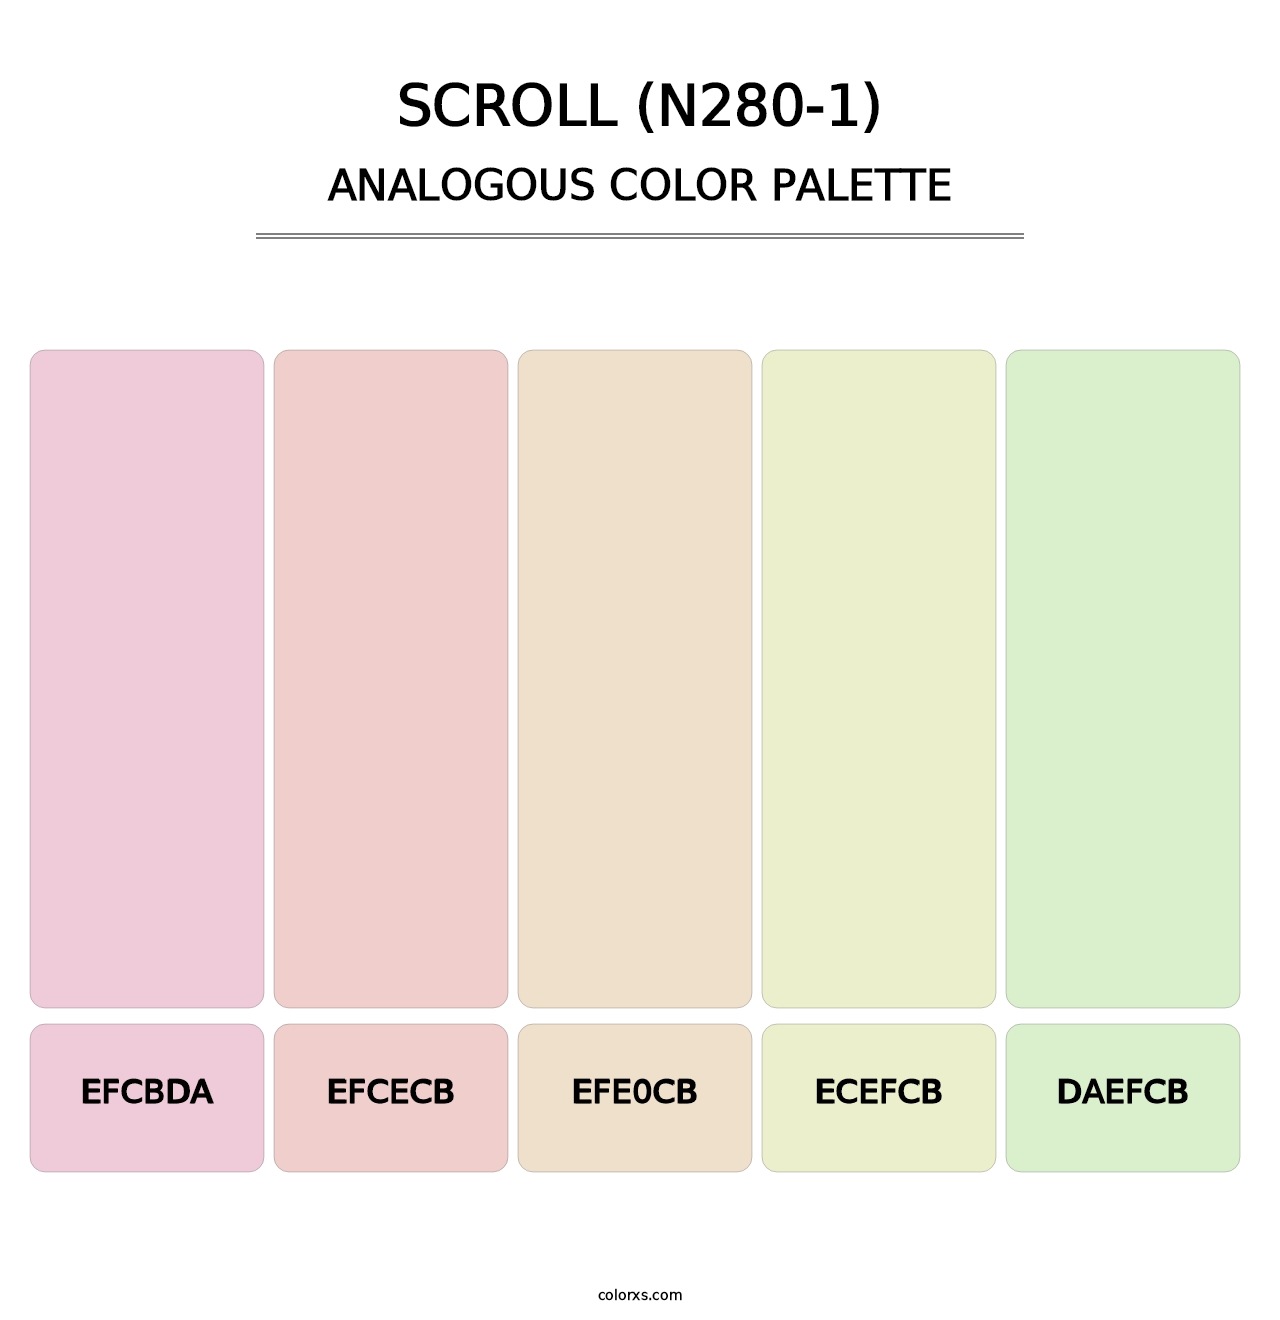 Scroll (N280-1) - Analogous Color Palette